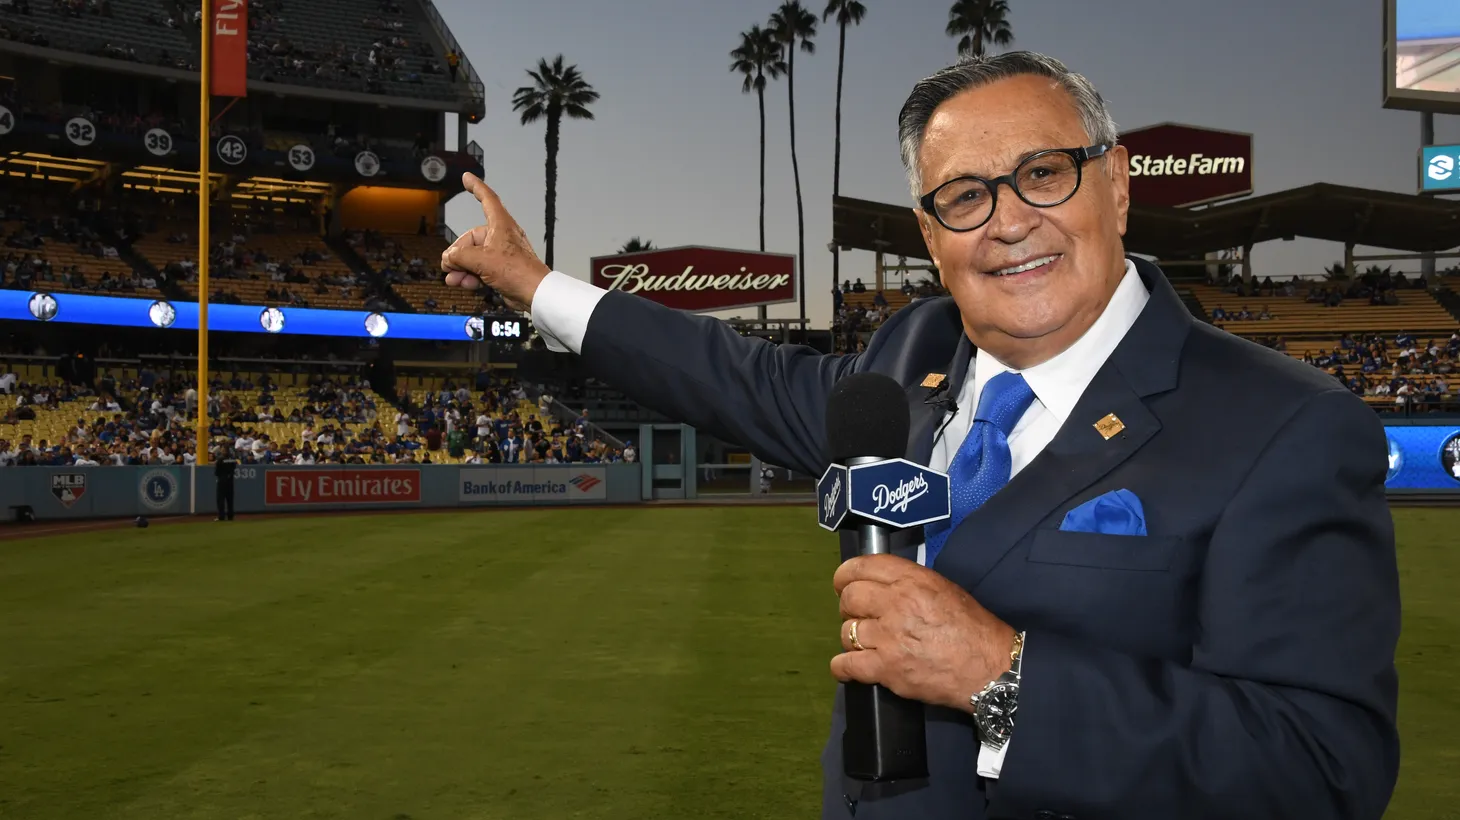 After six decades behind the mic, 2022 will be Jaime Jarrín’s final year as the Spanish language broadcaster for the LA Dodgers.